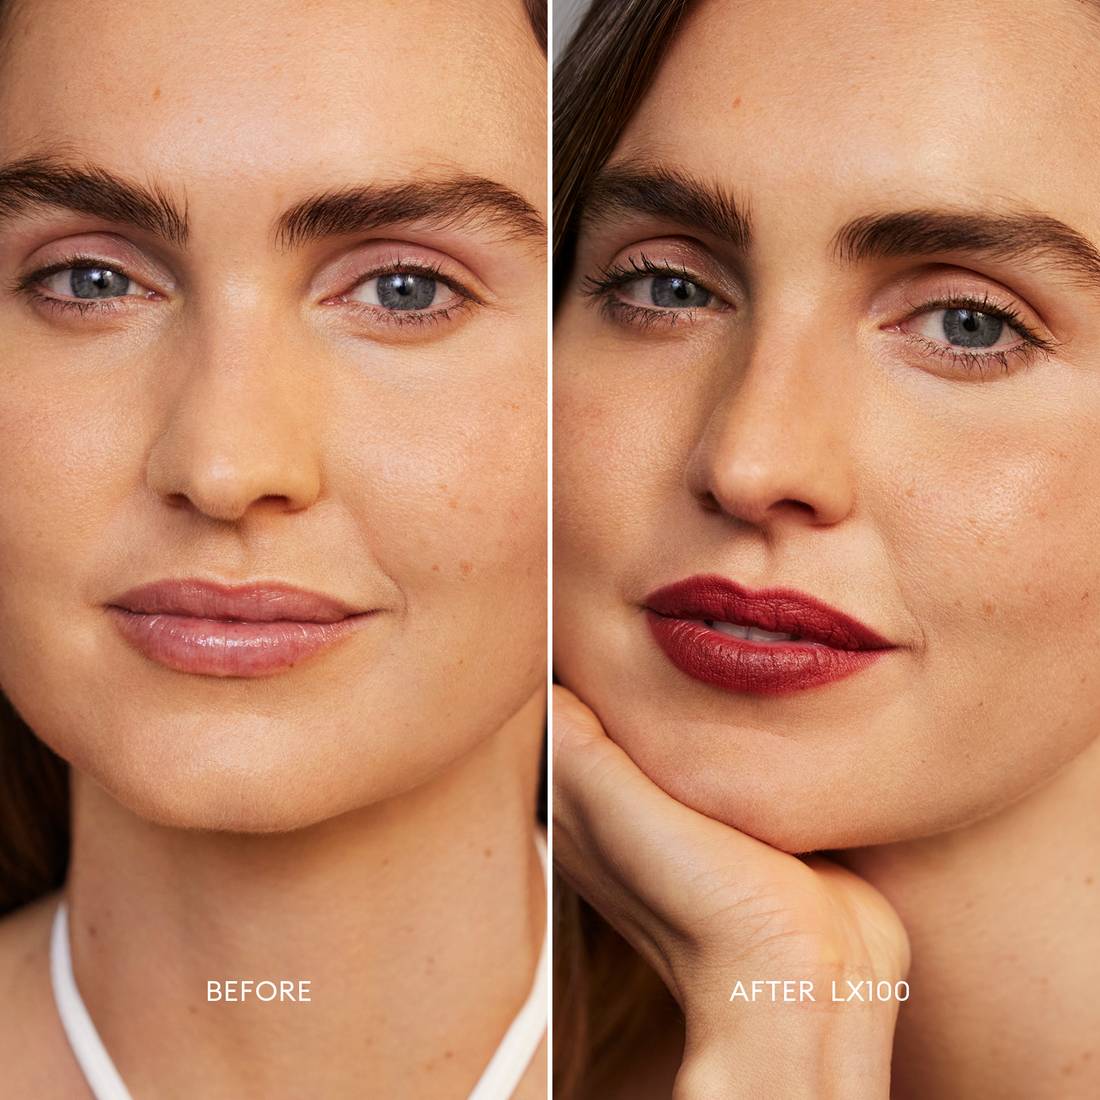 Before and after image of a Medium/Deep Skin Tone, Peach Undertone model wearing Softlight Luminous Hydrating Concealer in shade 100. 2